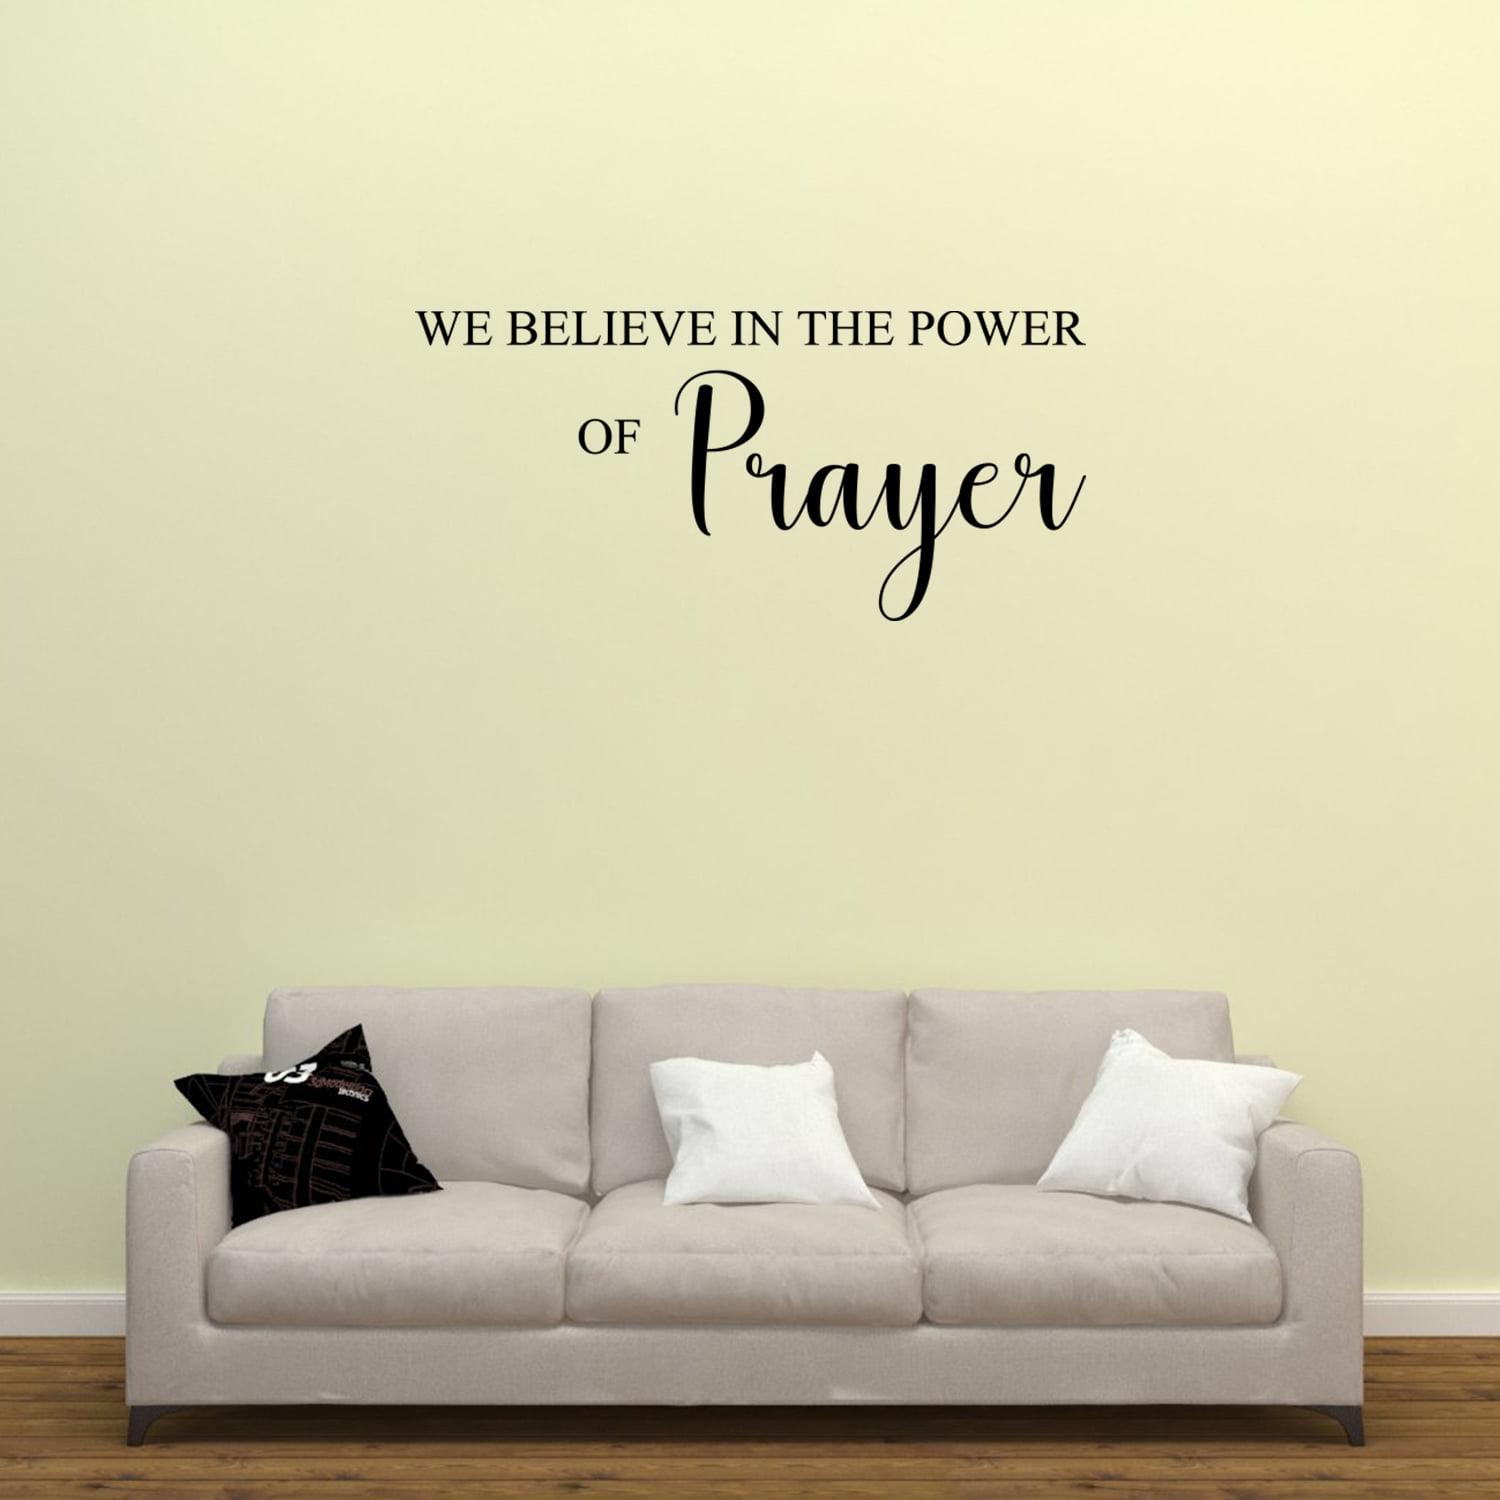 We Believe In The Power Of Prayer Wall Decal Religious Quote Vinyl Art ...
